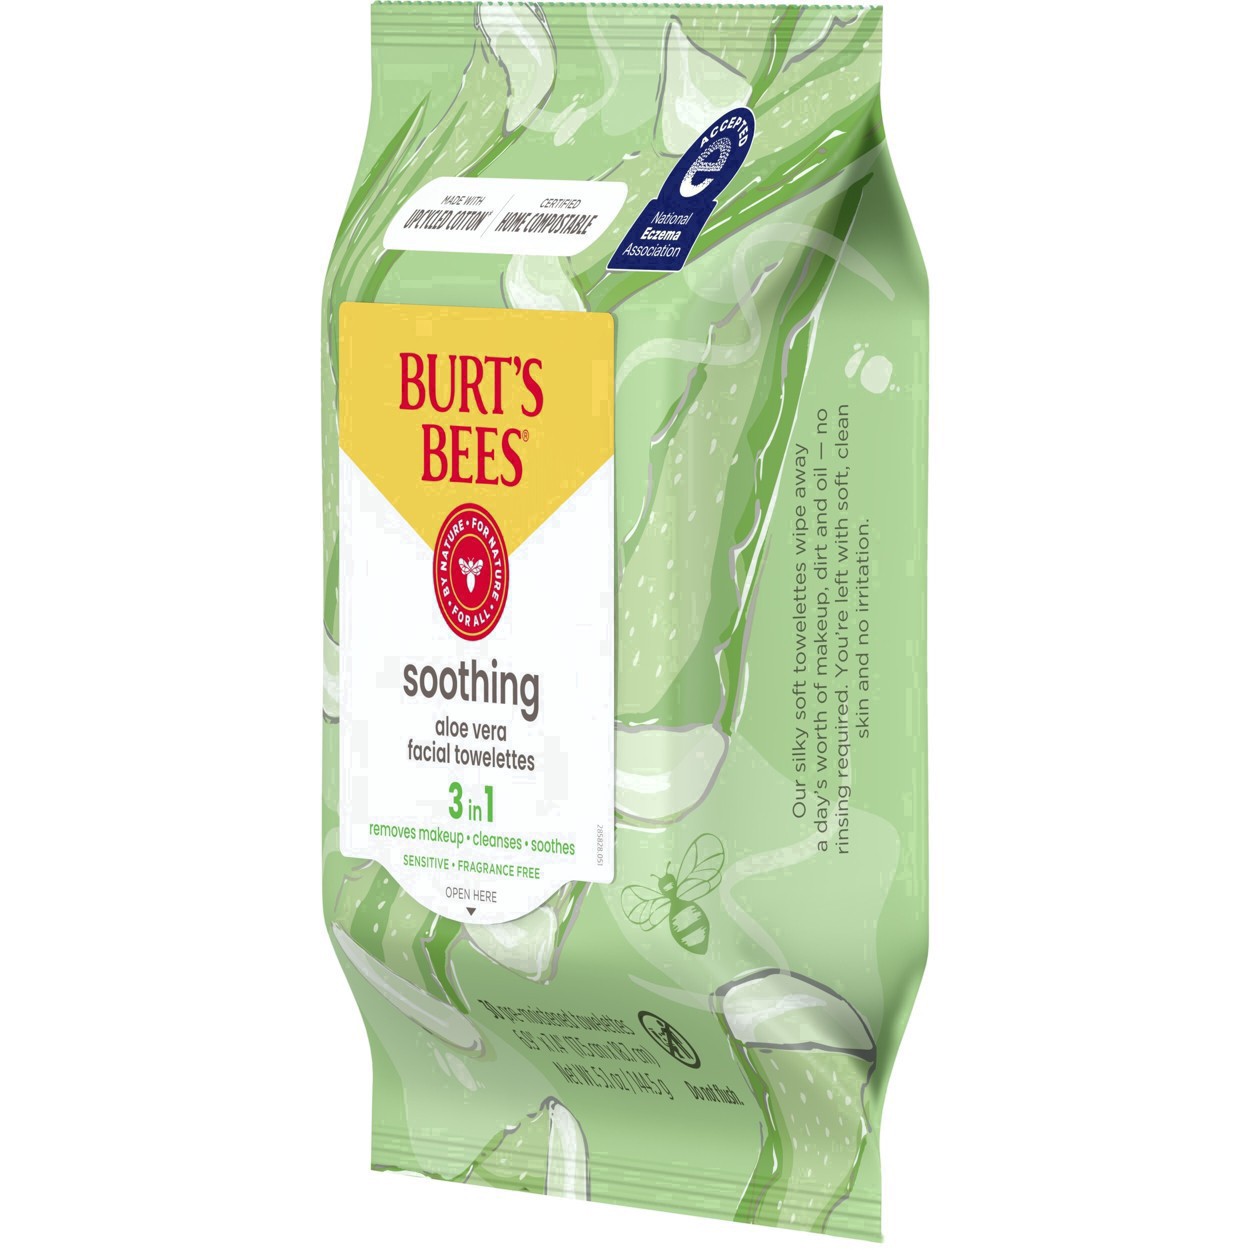 slide 10 of 137, Burt's Bees Soothing Facial Cleanser and Makeup Remover Towelettes with Aloe Vera for Sensitive Skin, Made with Upcycled Cotton, 30 Count, 30 ct